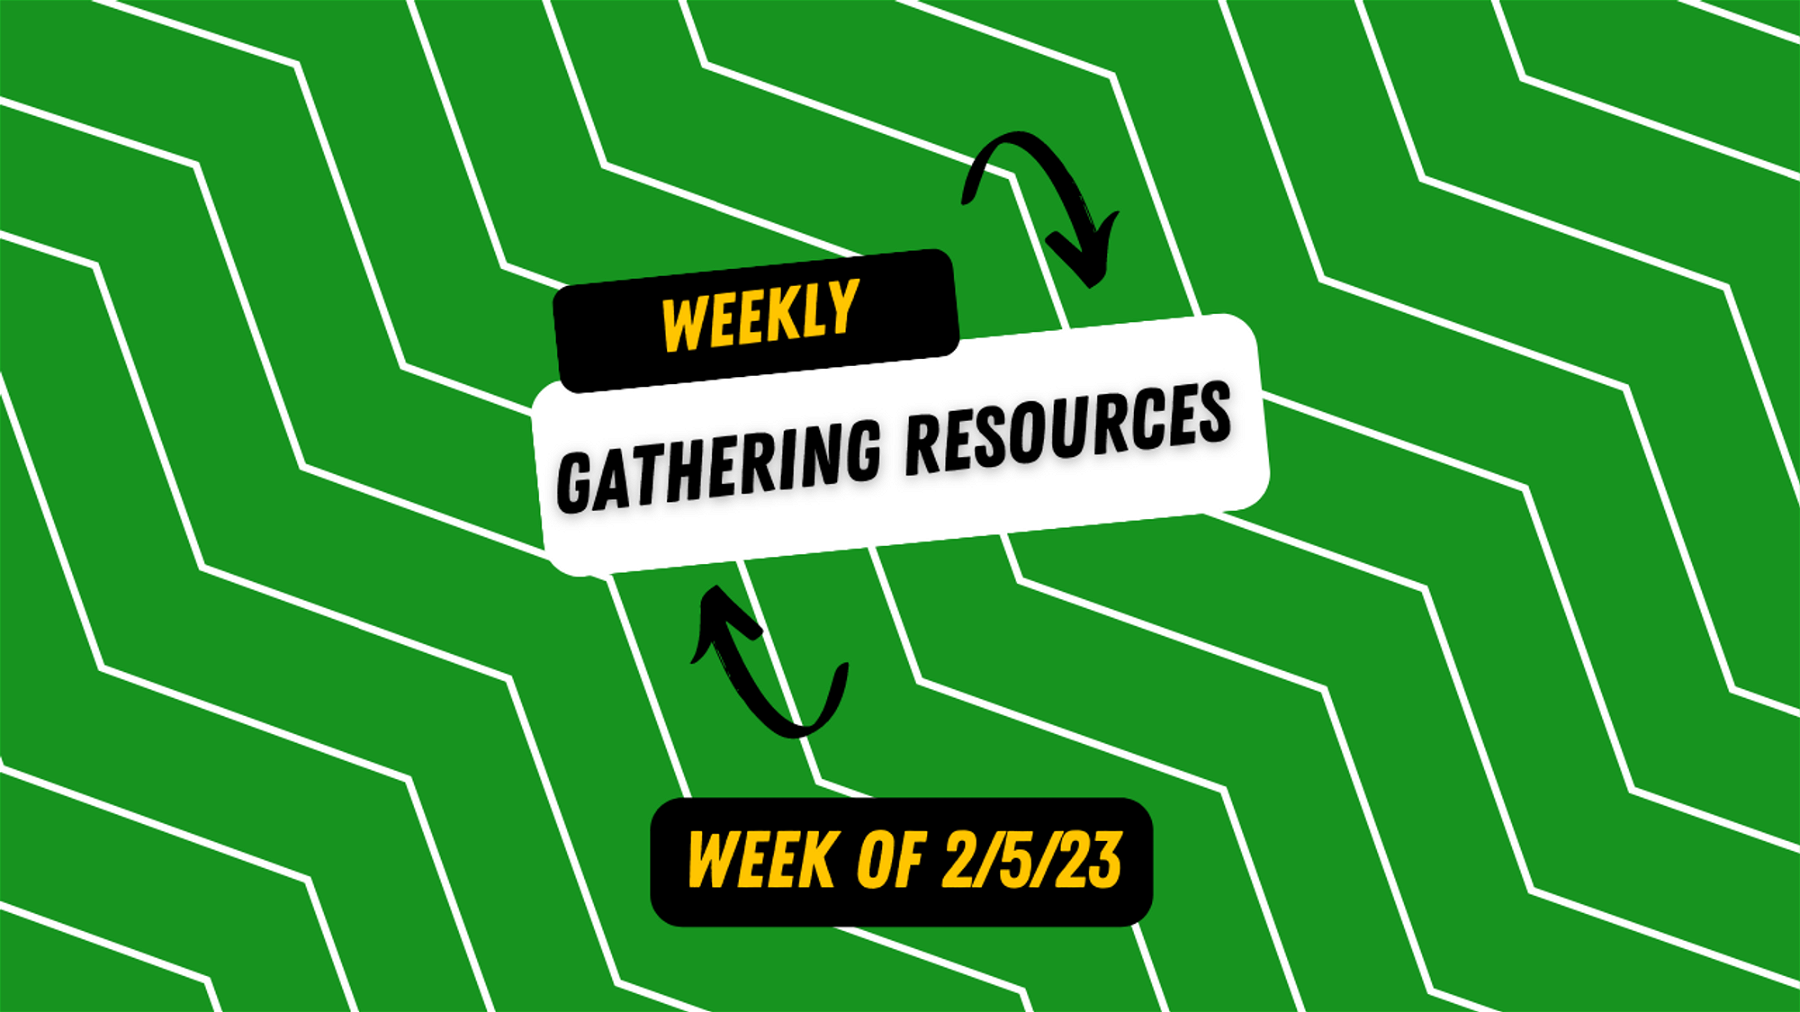 Weekly Gathering Resources for 2/5/23